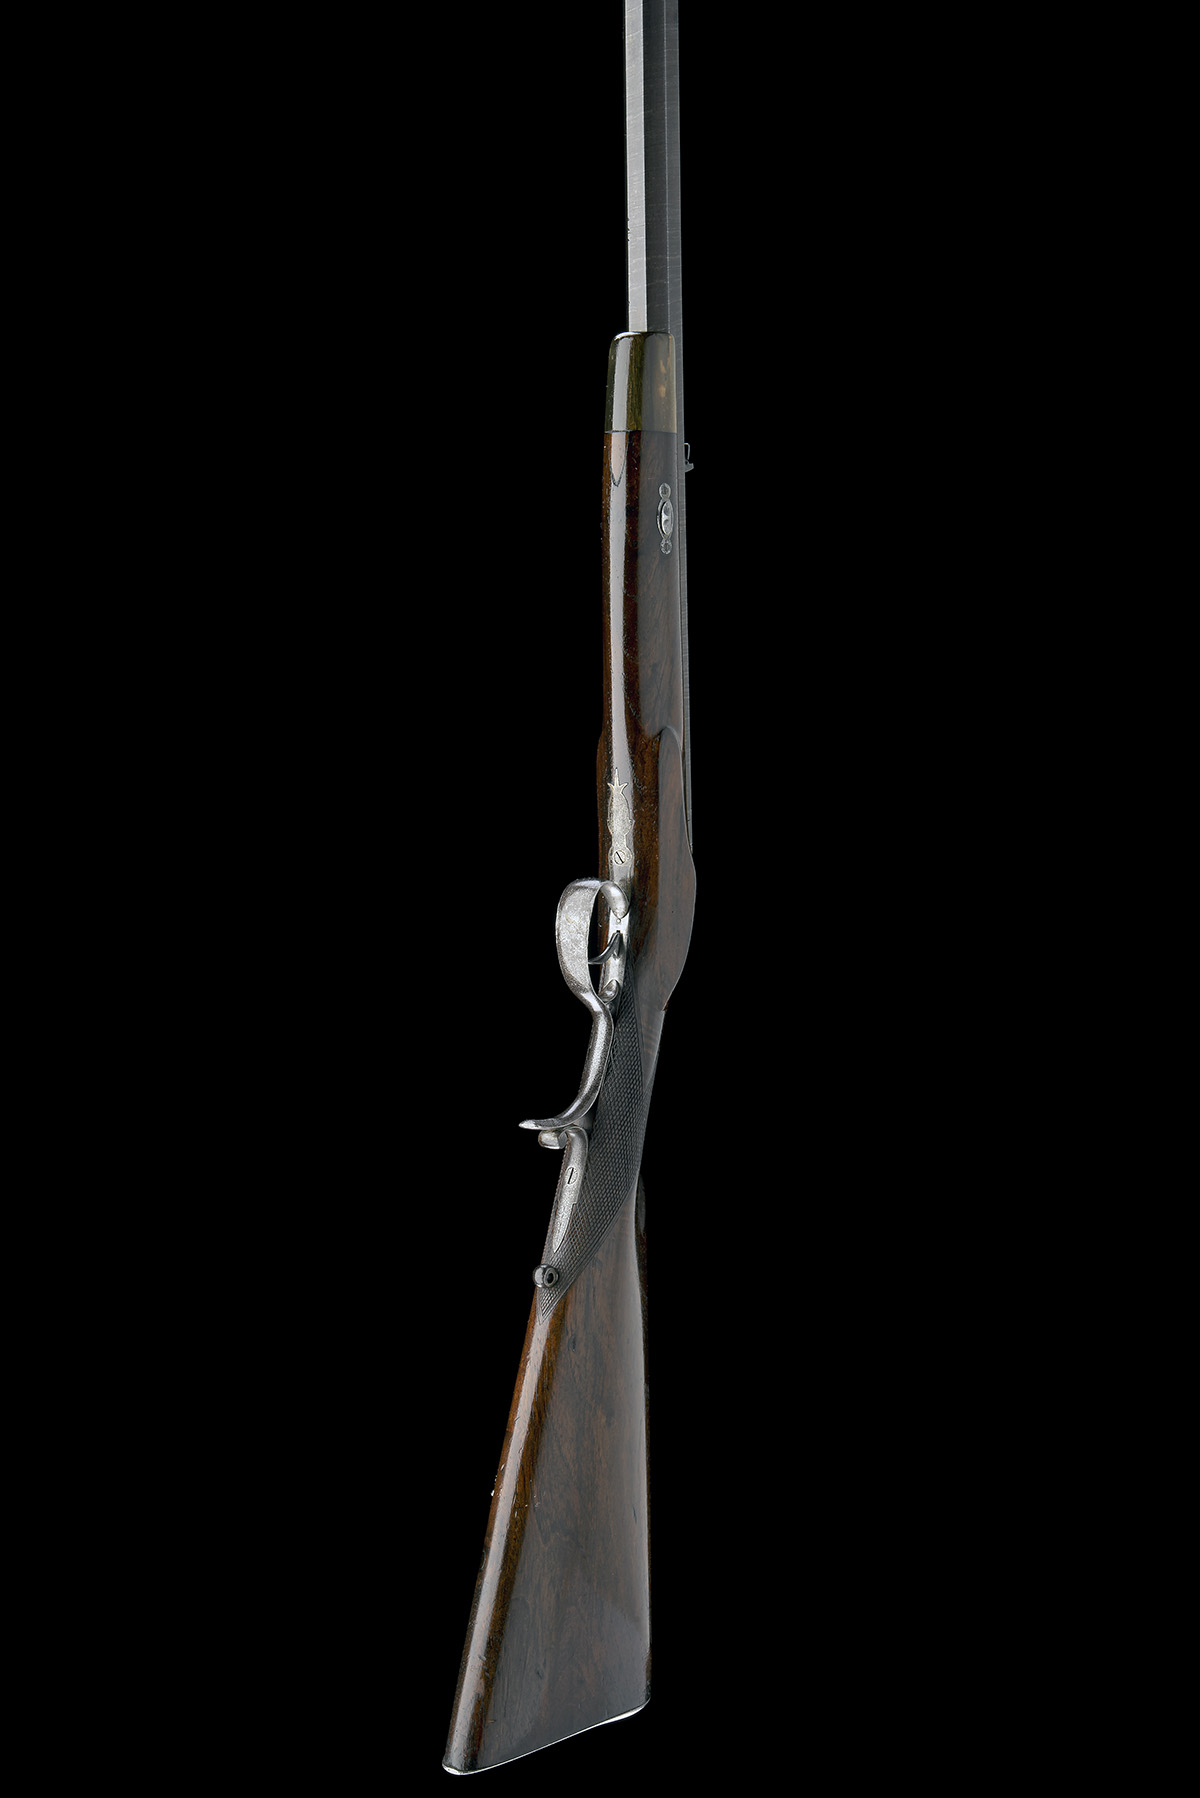 W. & J. RIGBY, DUBLIN A 22-BORE PERCUSSION SINGLE-BARRELLED RIFLE FOR LARGER GAME, serial no. 10708, - Image 6 of 8